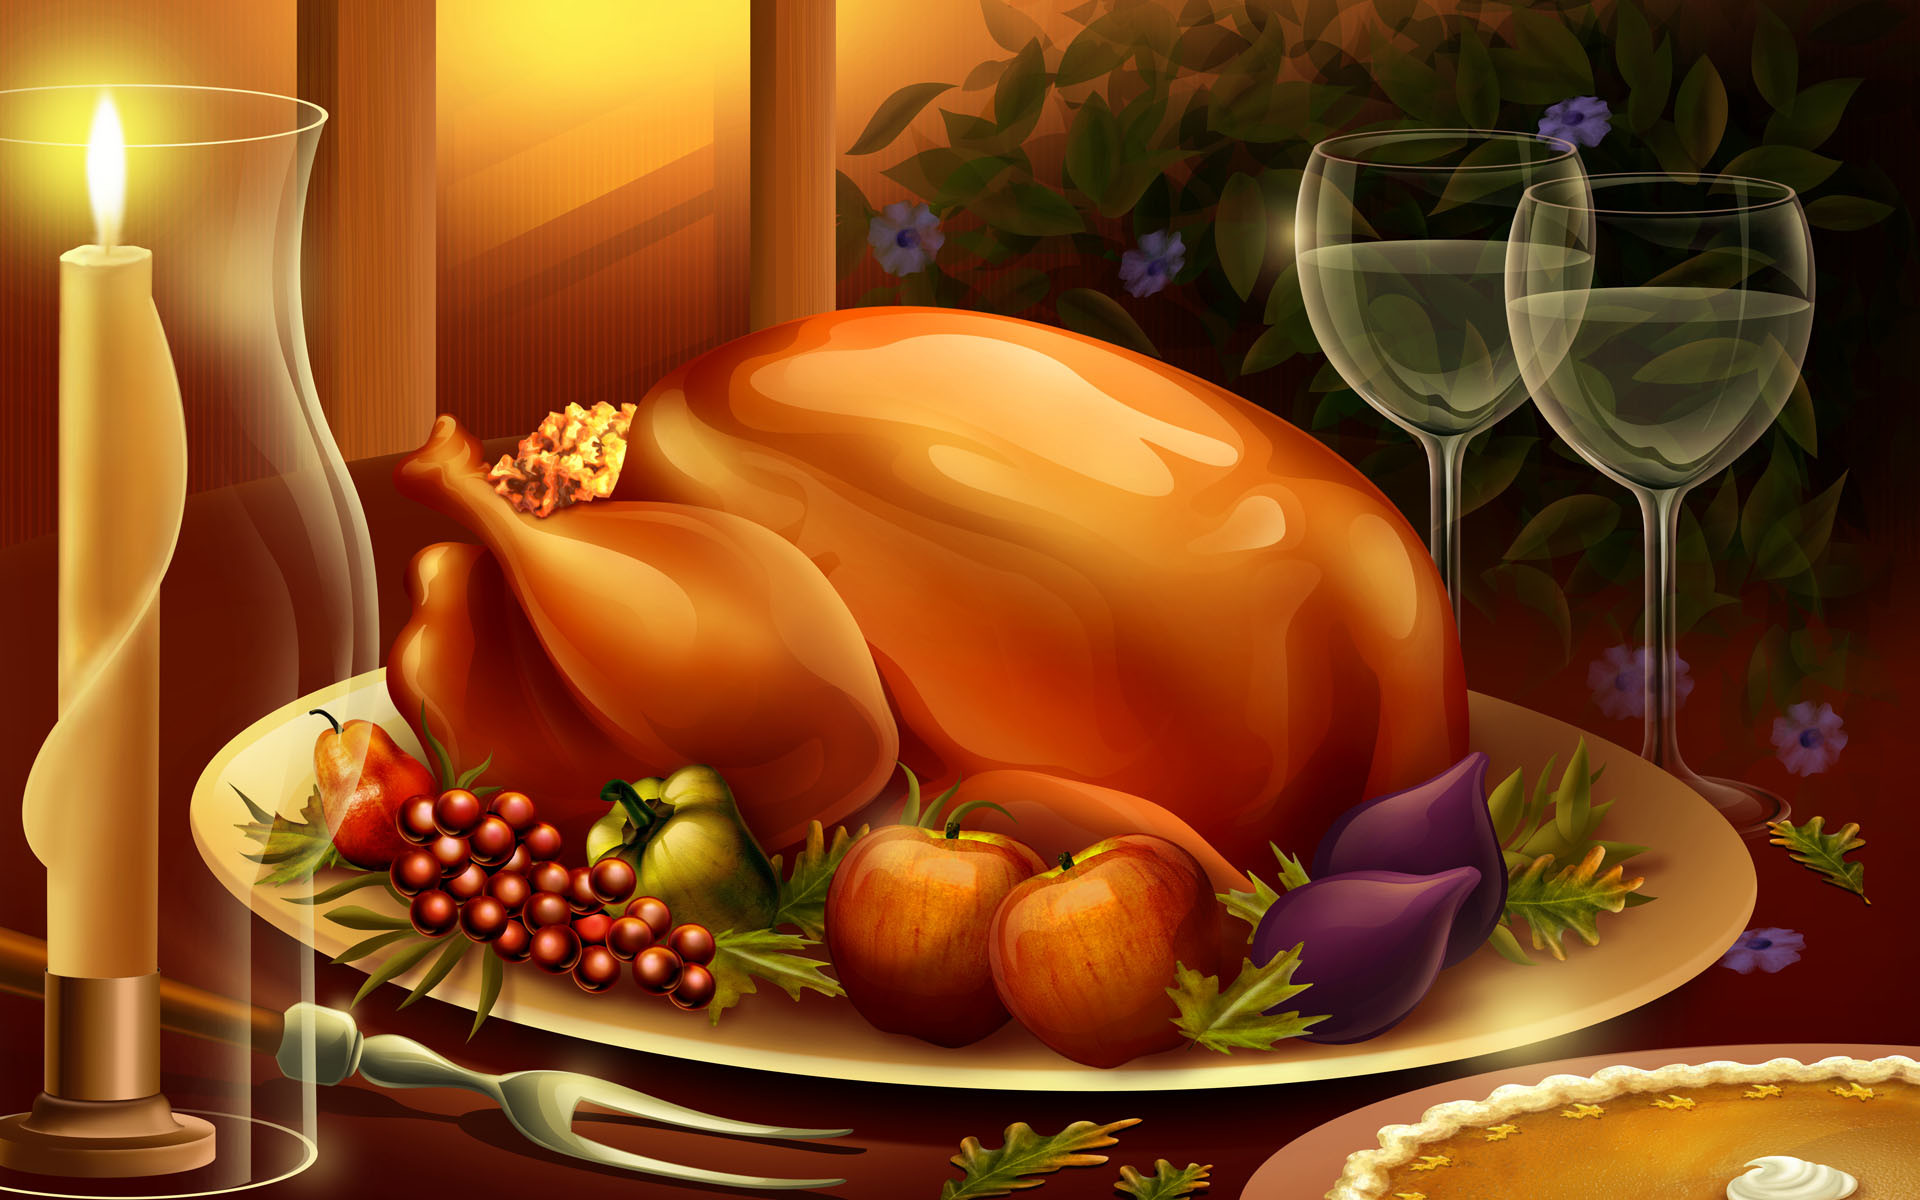 20 Thanksgiving Wallpapers  Backgrounds for Your Holiday Celebration 2022   Fotor